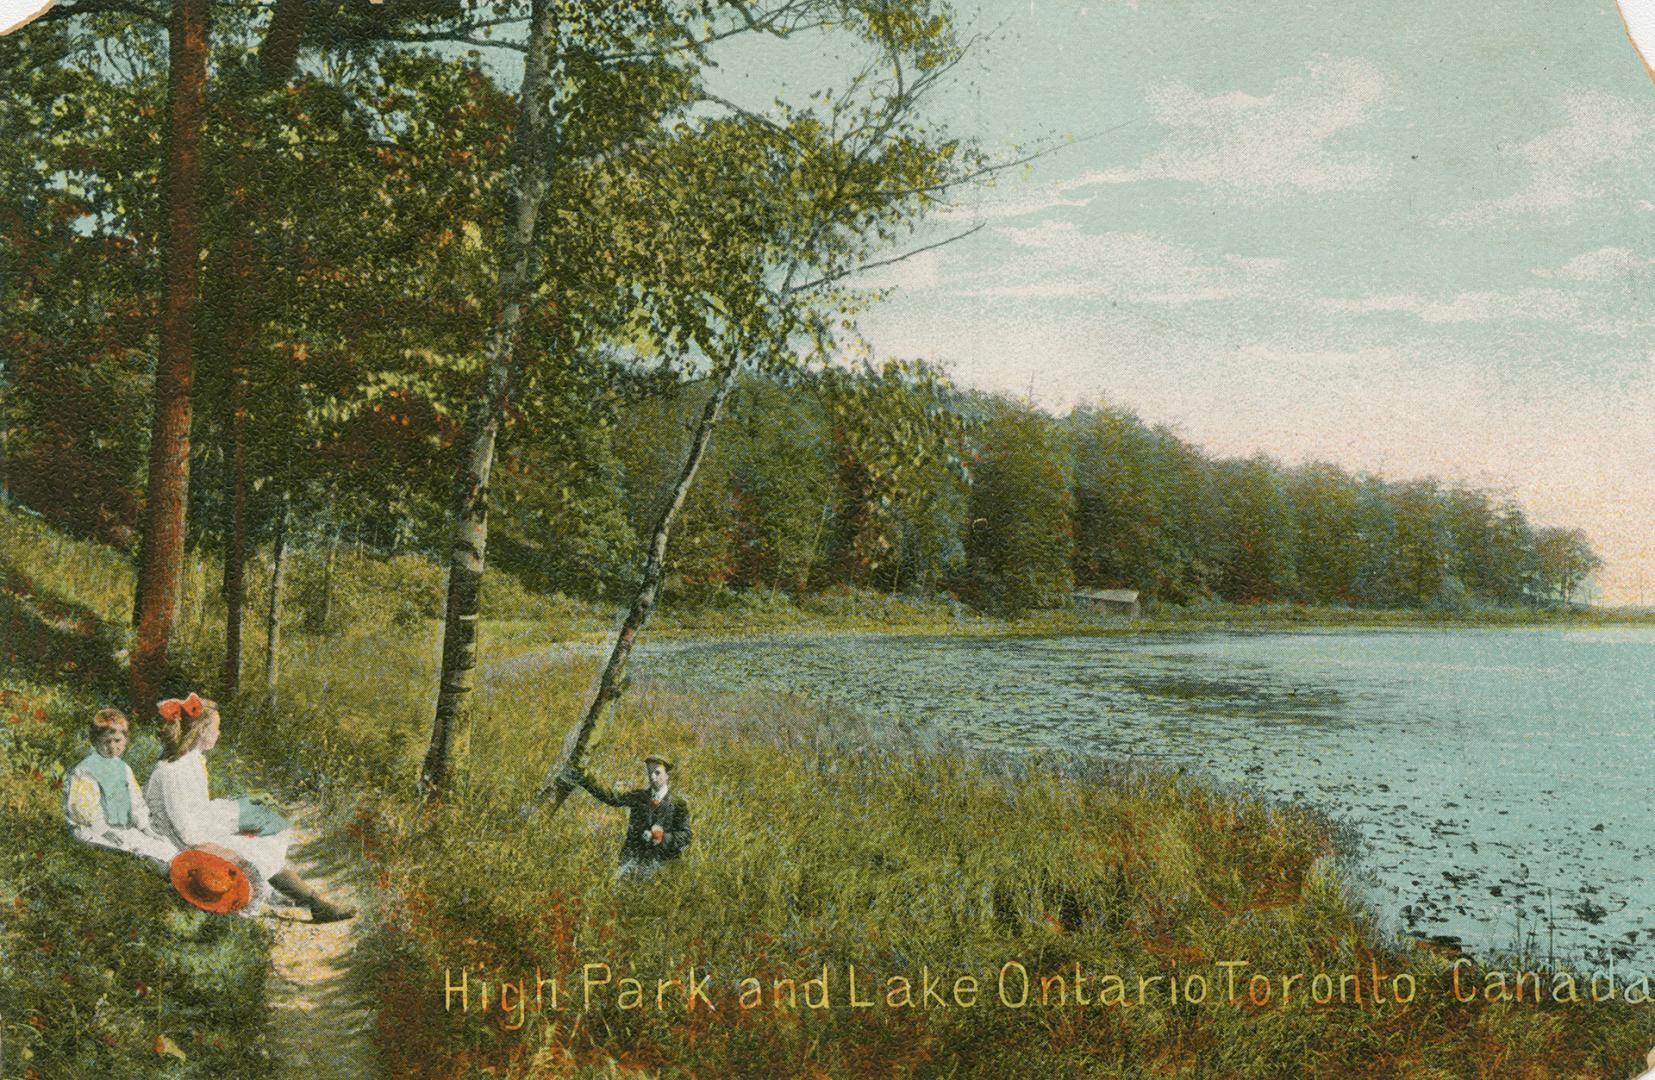 Bucolic scene of three children by Grenadier Pond in High Park. Trees and high grass line the e ...